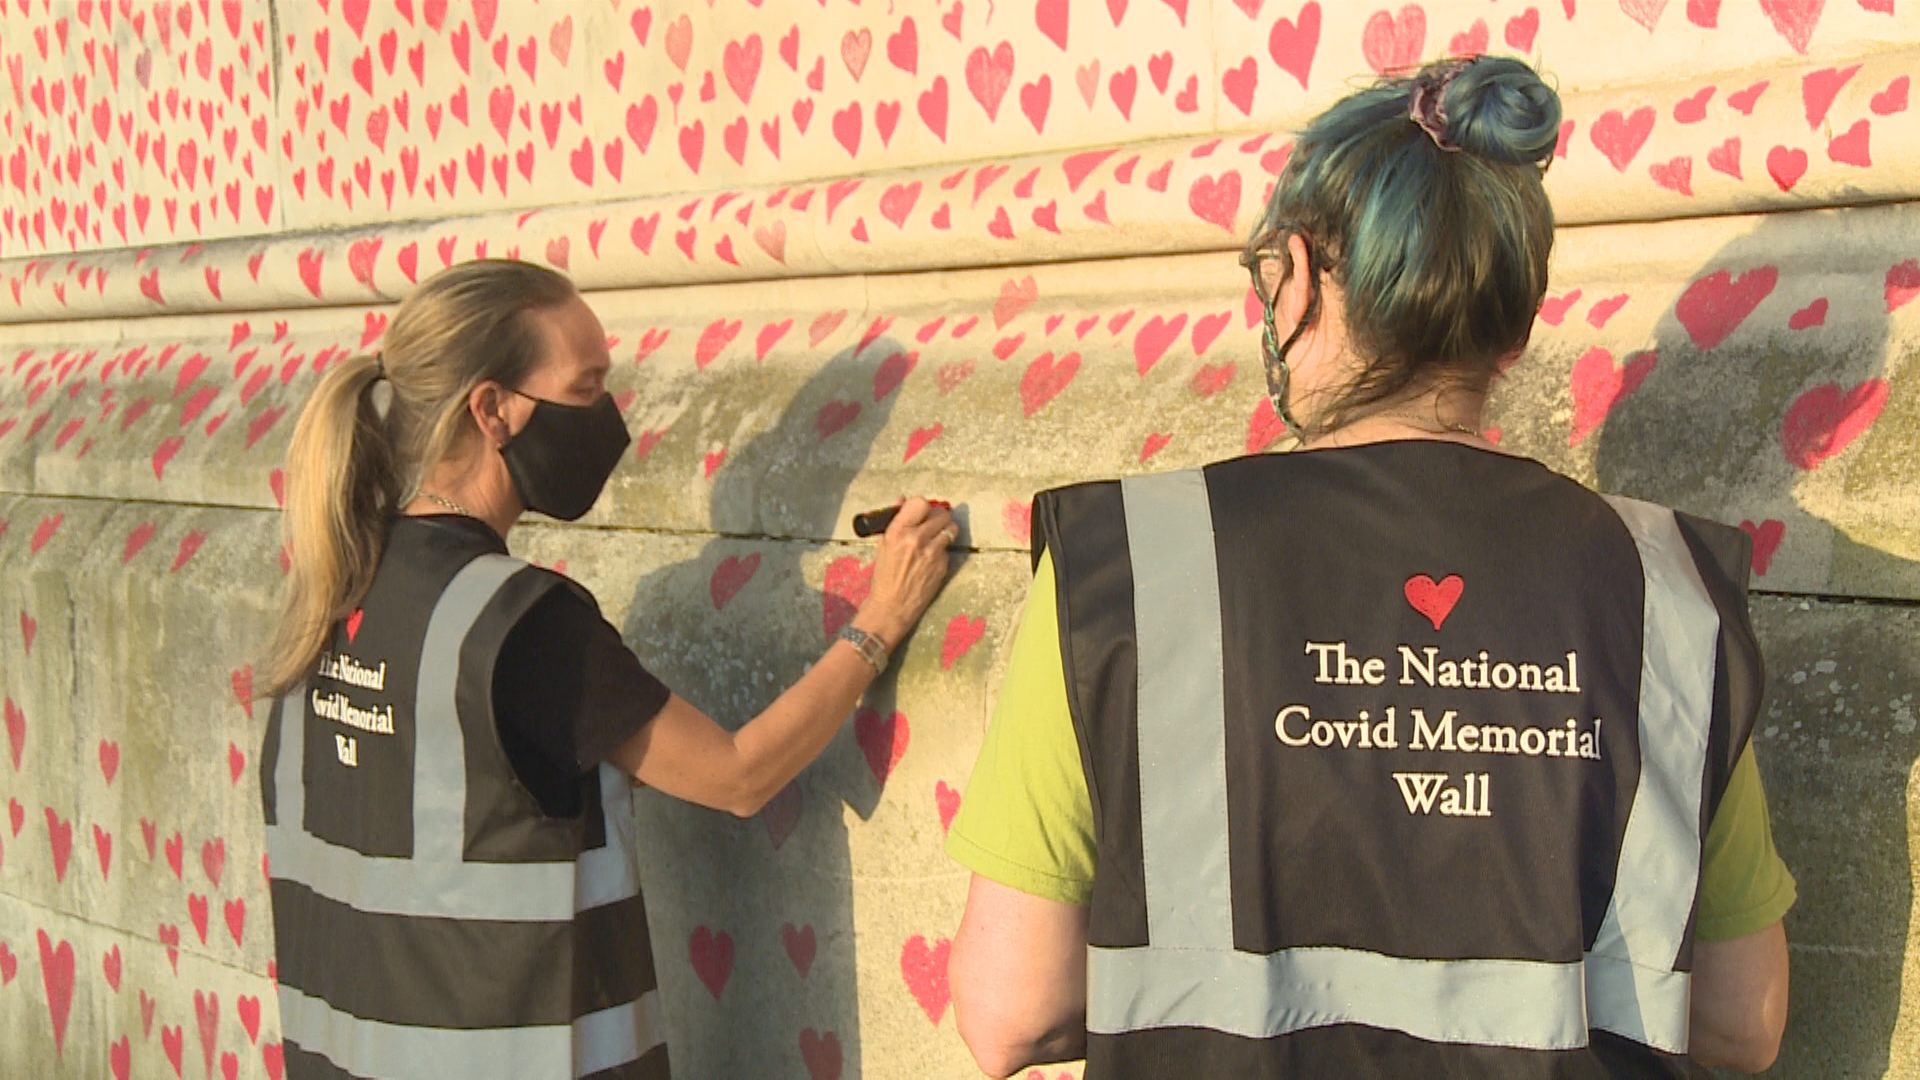 Sophie Rawlings (left) and another member of Covid-19 Bereaved Families for Justice UK paints hearts on the National Covid Memorial Wall in London, England.